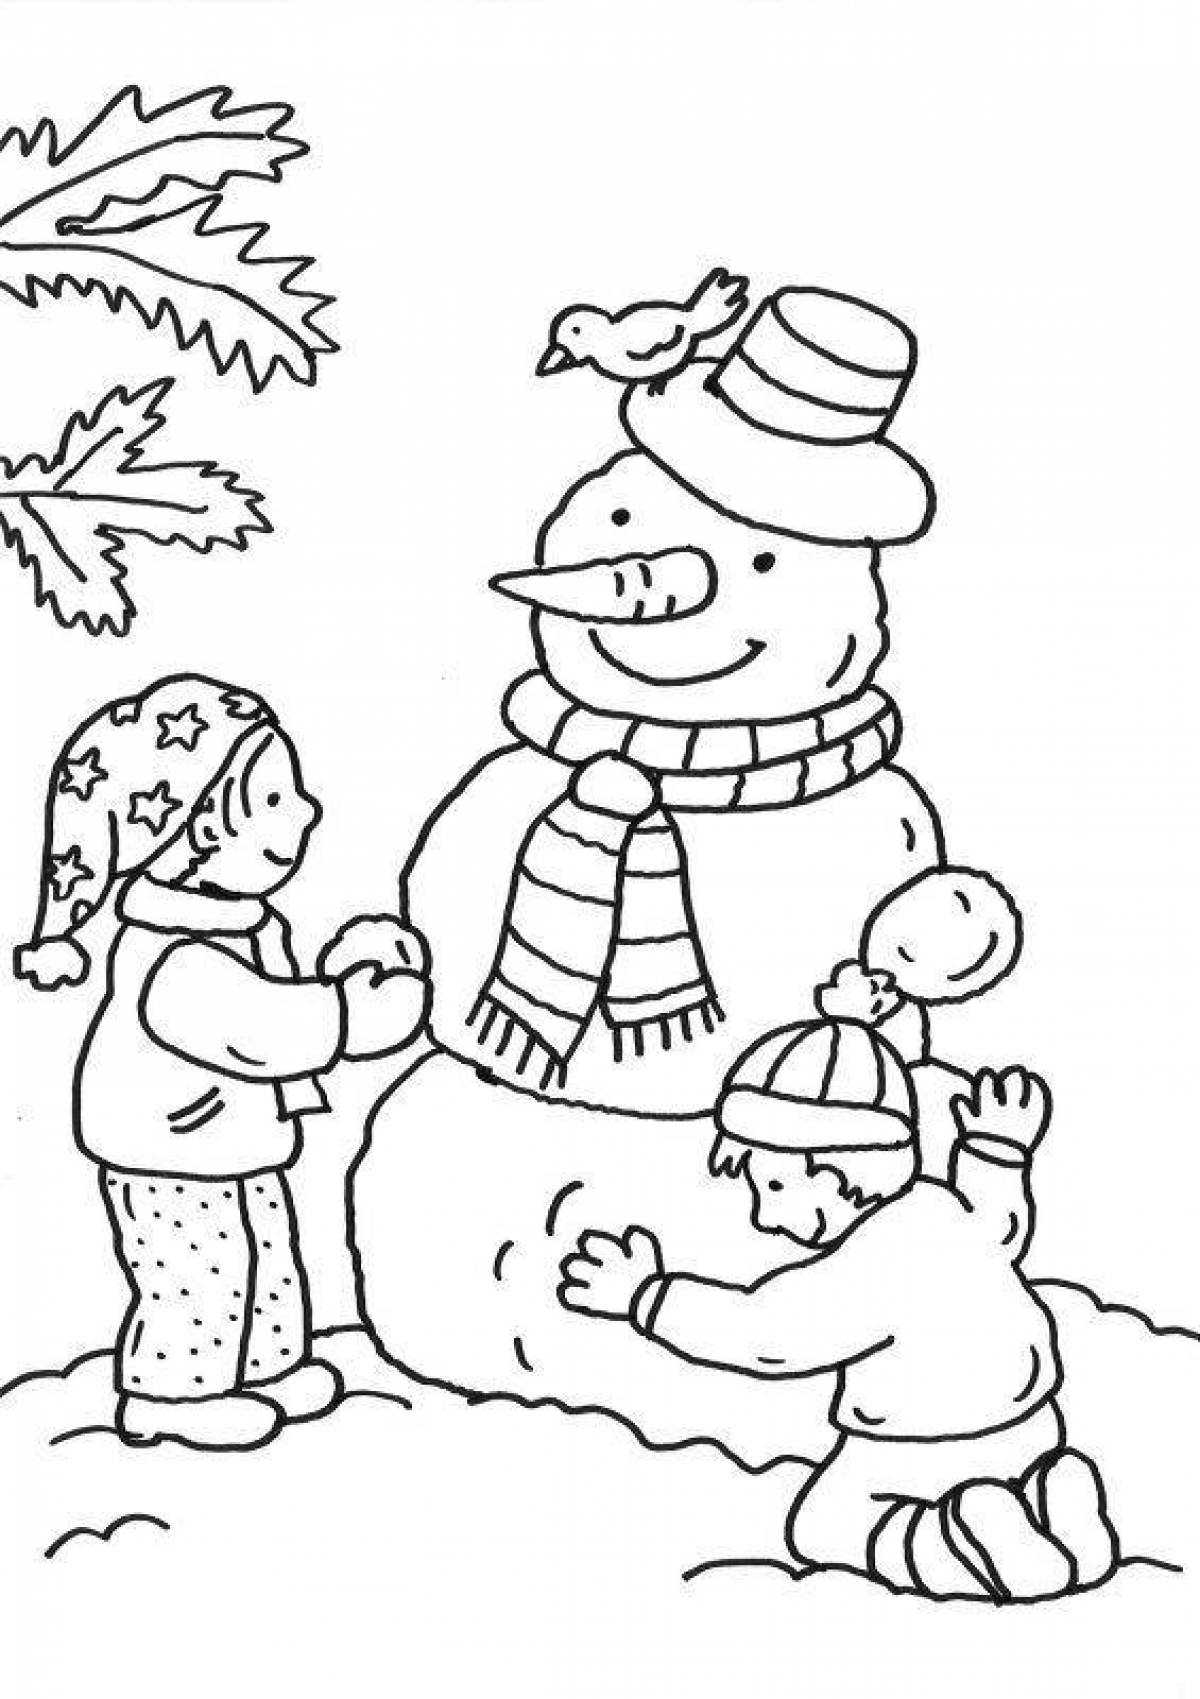 Children's making a snowman coloring book